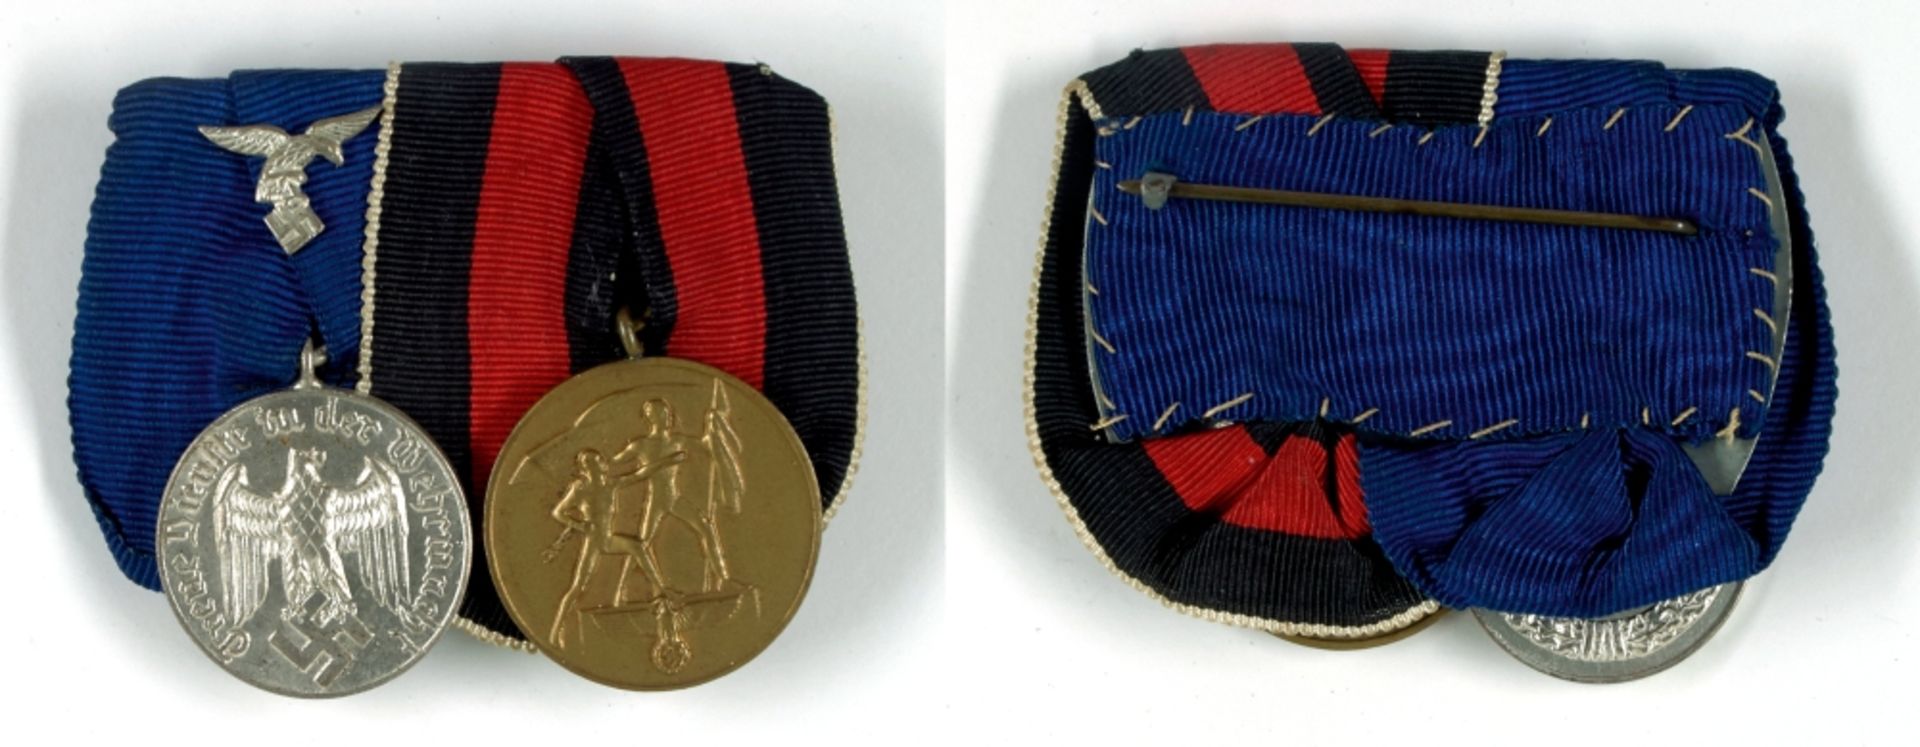 Medal clasp with Service Award medal for 4 years with applied band eagle and memory medal 1. Oct